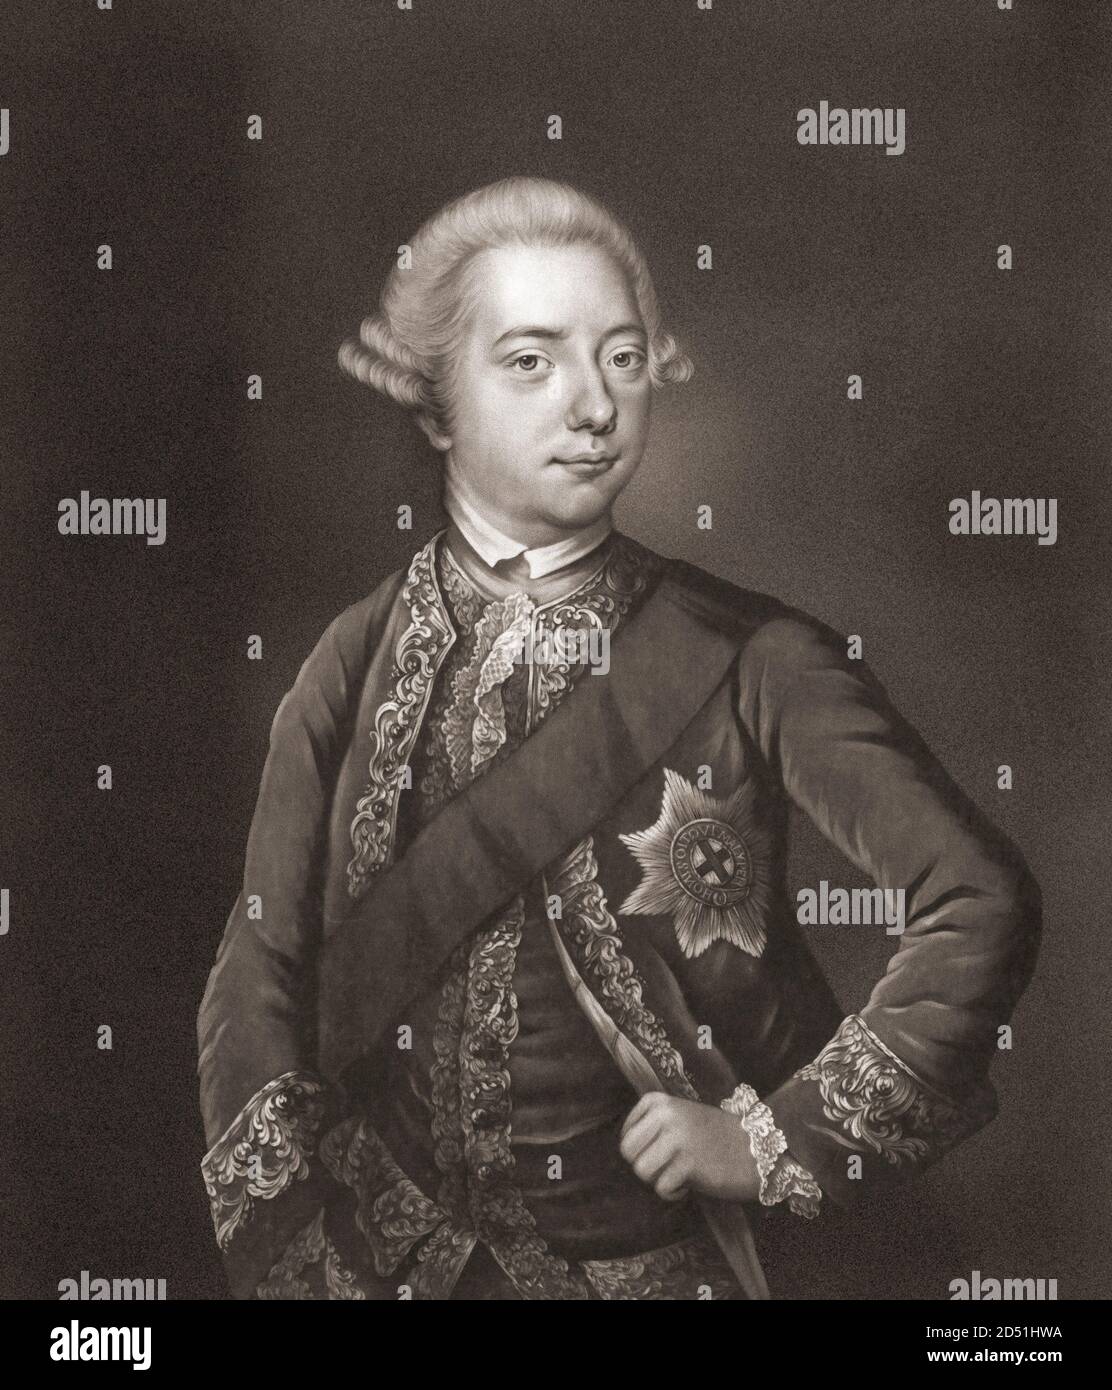 William V, Prince of Orange, 1748 – 1806.  Last Stadtholder of Dutch Republic. Also known as Prince of Nassau-Orange.  After an 18th century work by James Watson. Stock Photo